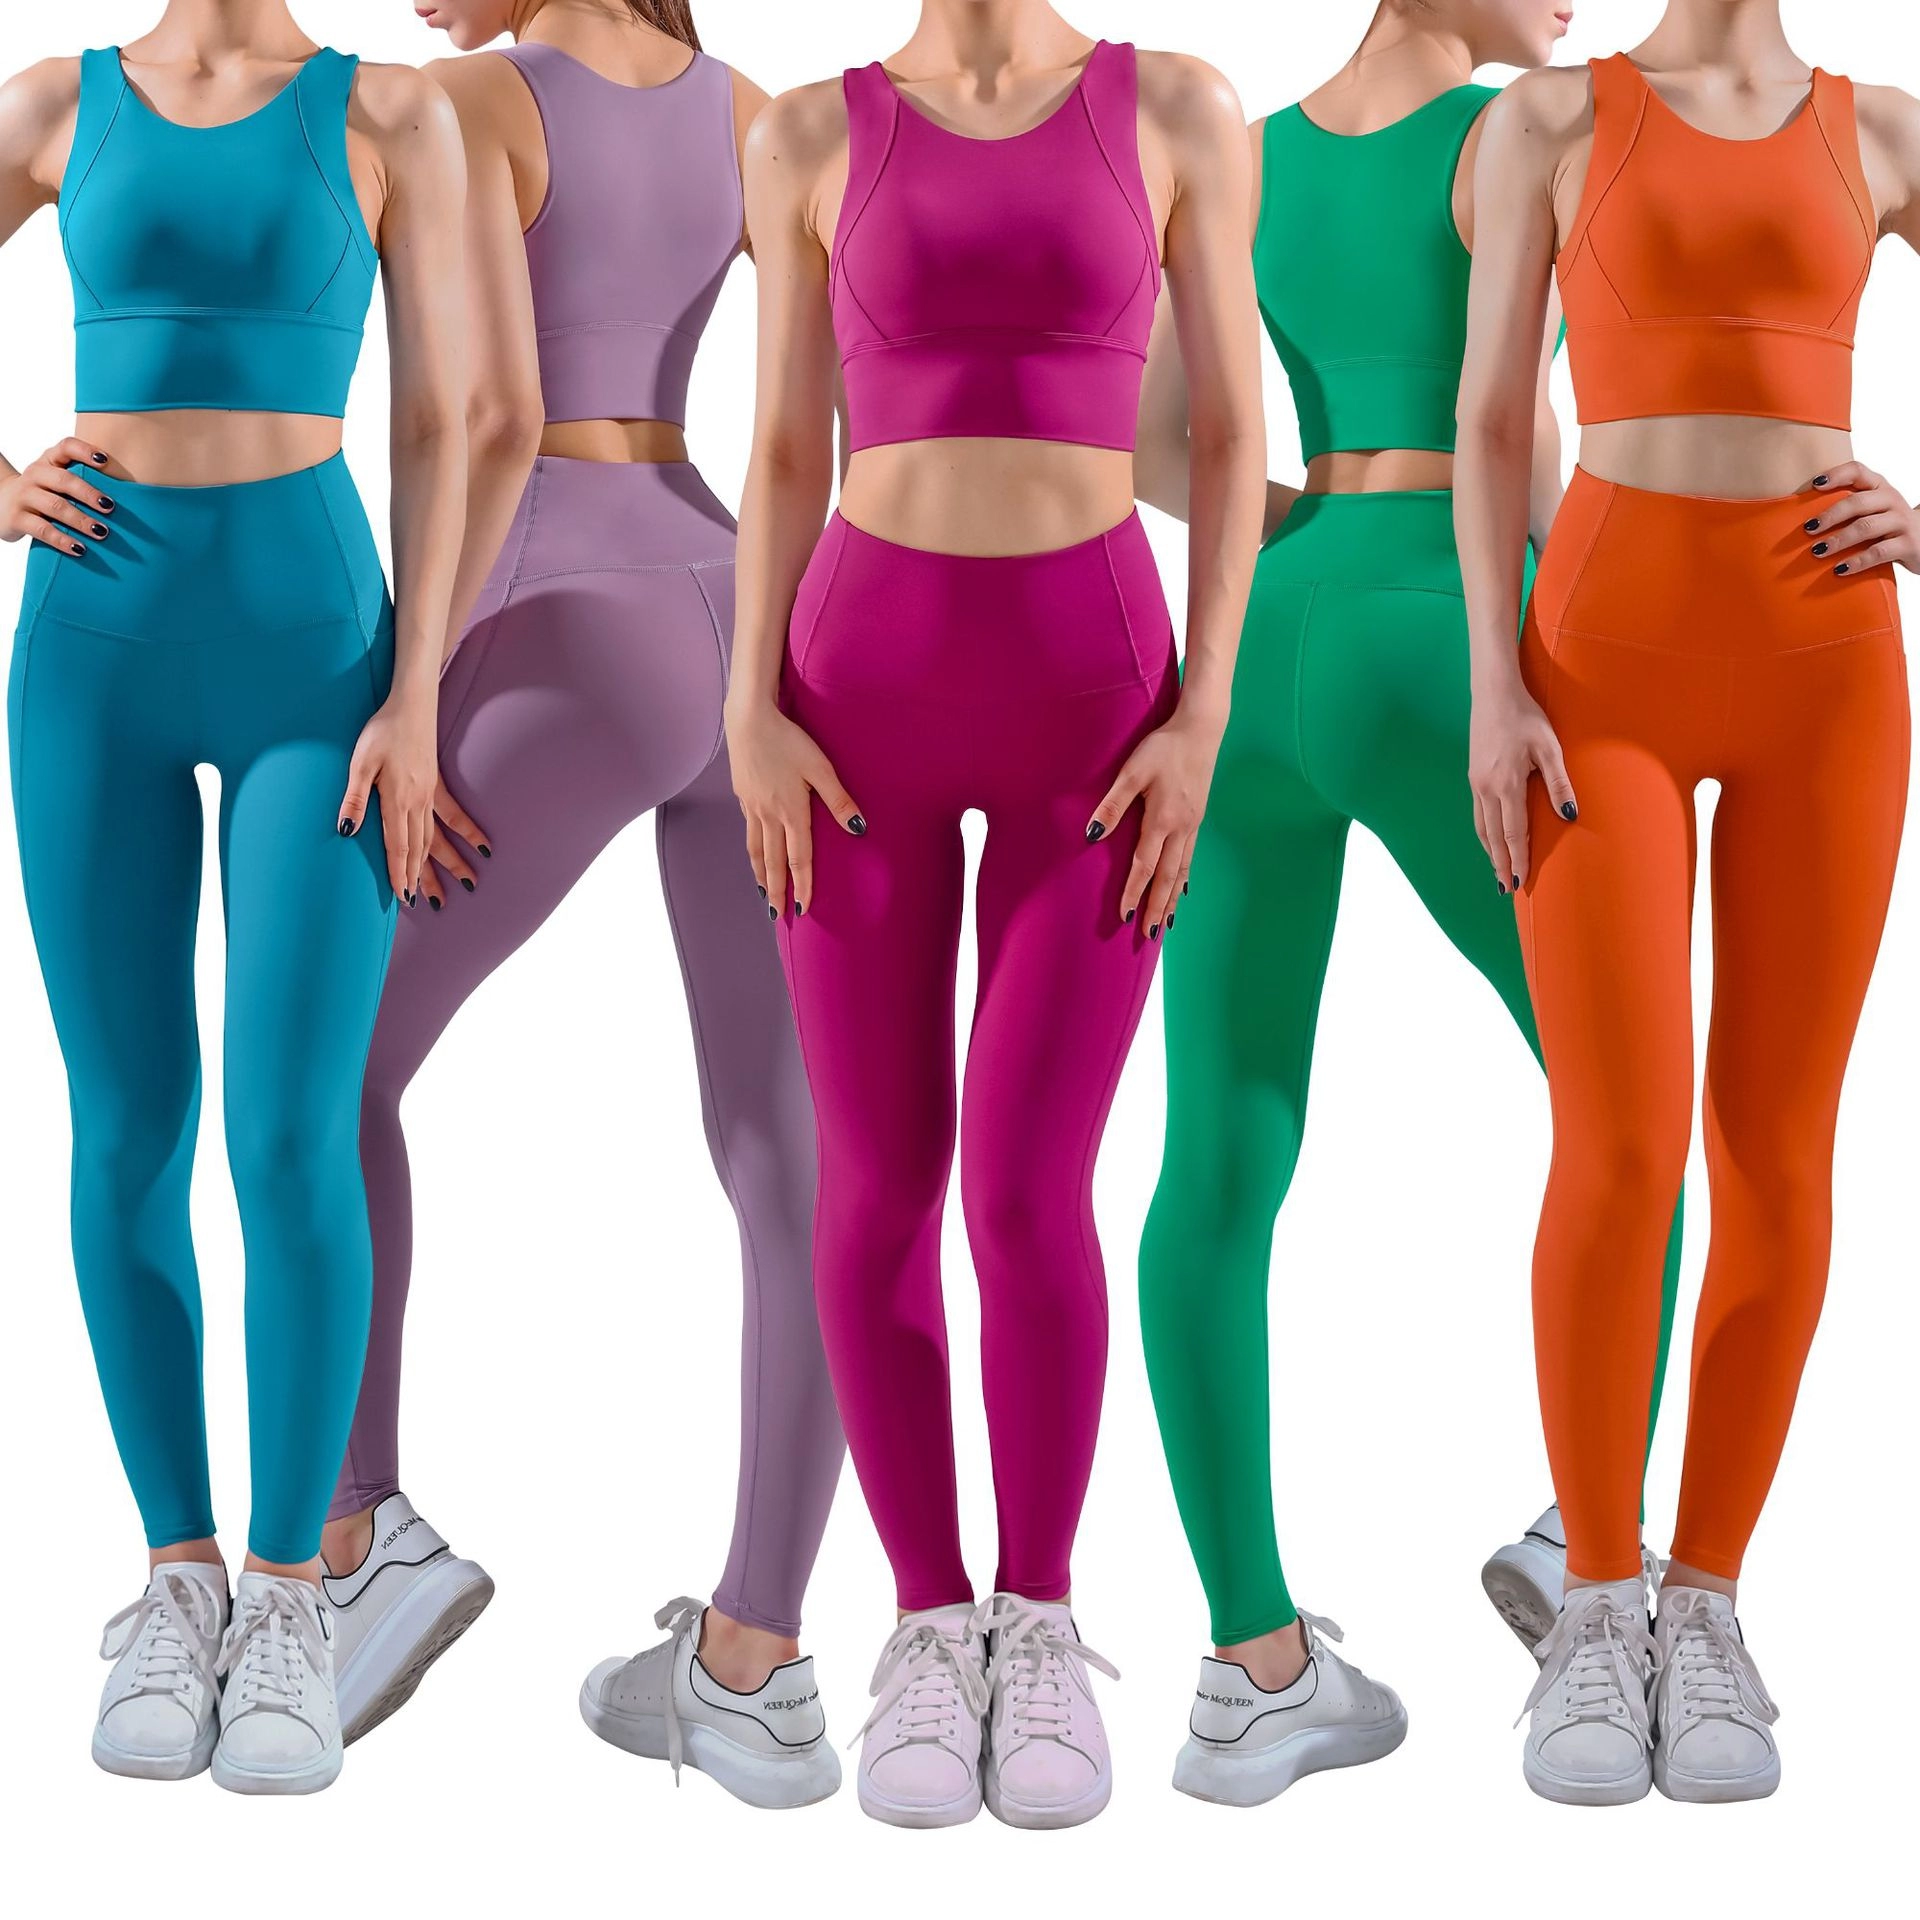 Hot Selling Sexy Women Seamless Yoga Suits Cross Straps Female Gym Activewear Set